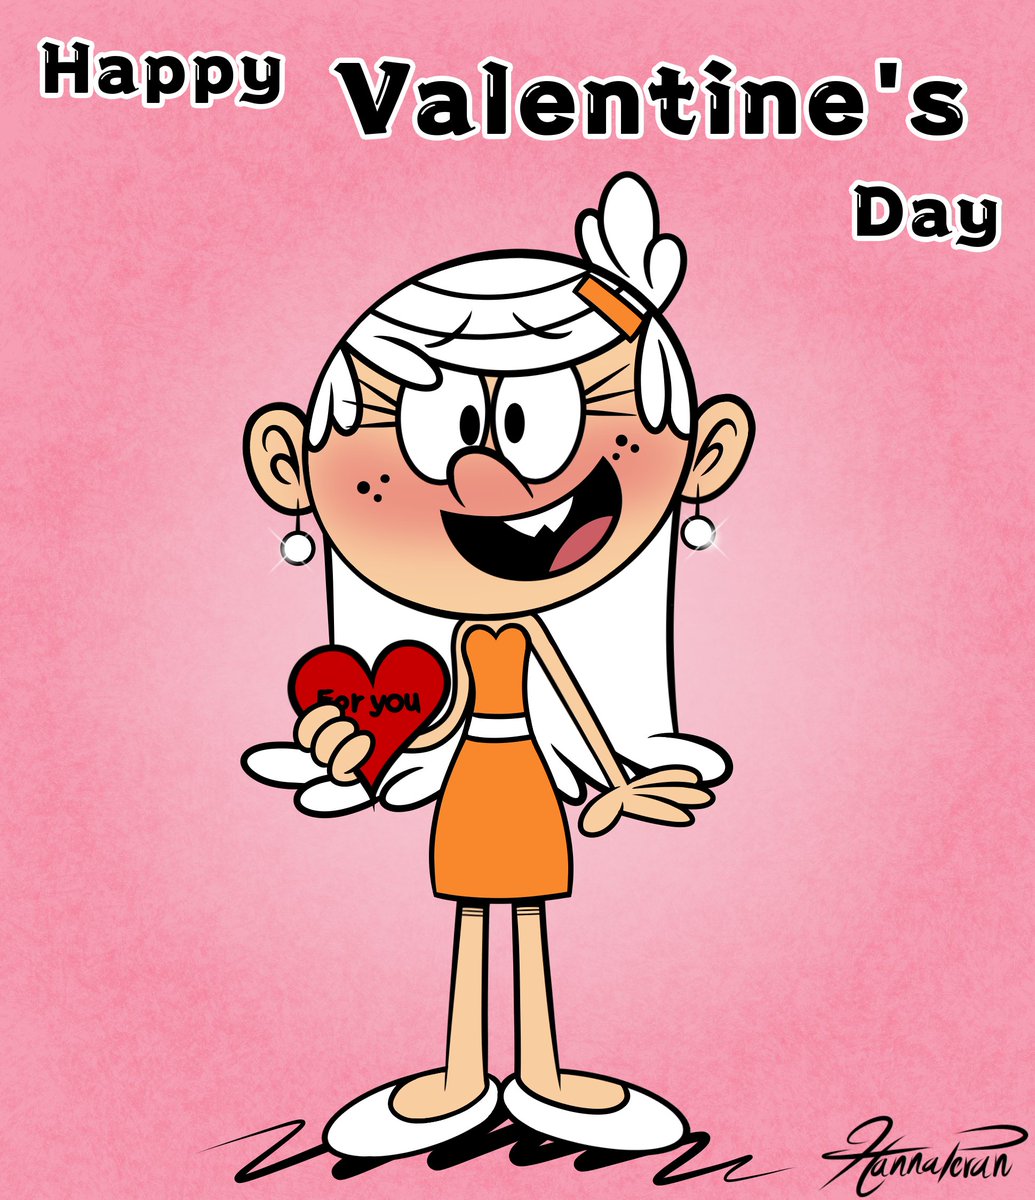 #HappyValentinesDay2021 to all.💖

Gift for someone☺️

#theloudhouse #loudhouse #lincolnloud #linkaloud #nickelodeon #fanart #myart